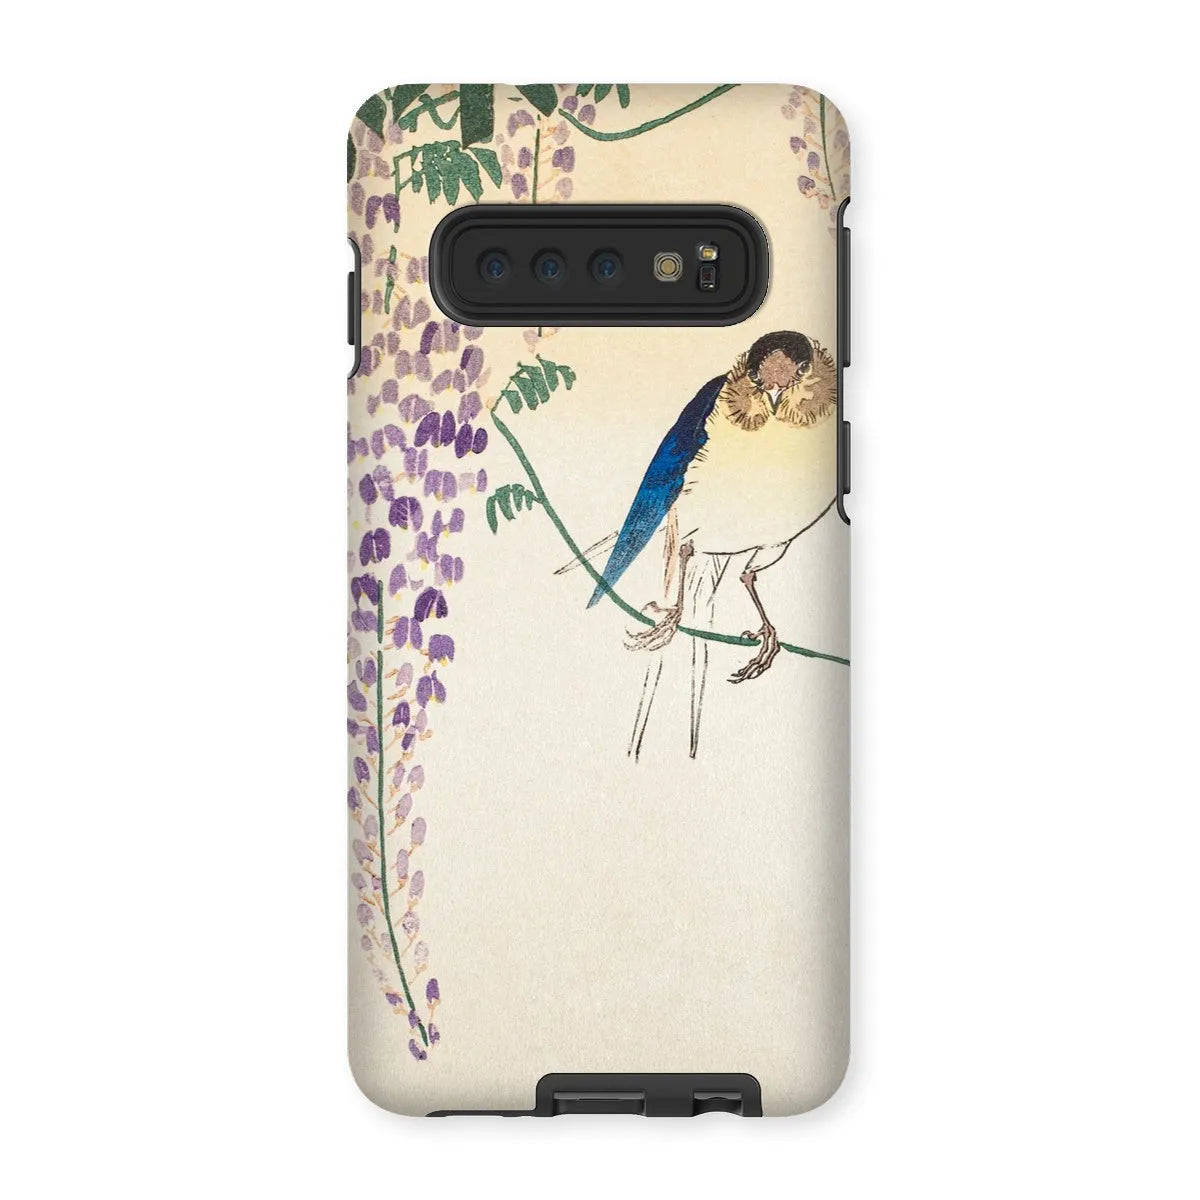 Wisteria And Swallow - Japanese Art Phone Case - Ohara Koson - Samsung Galaxy S10 / Matte - Mobile Phone Cases